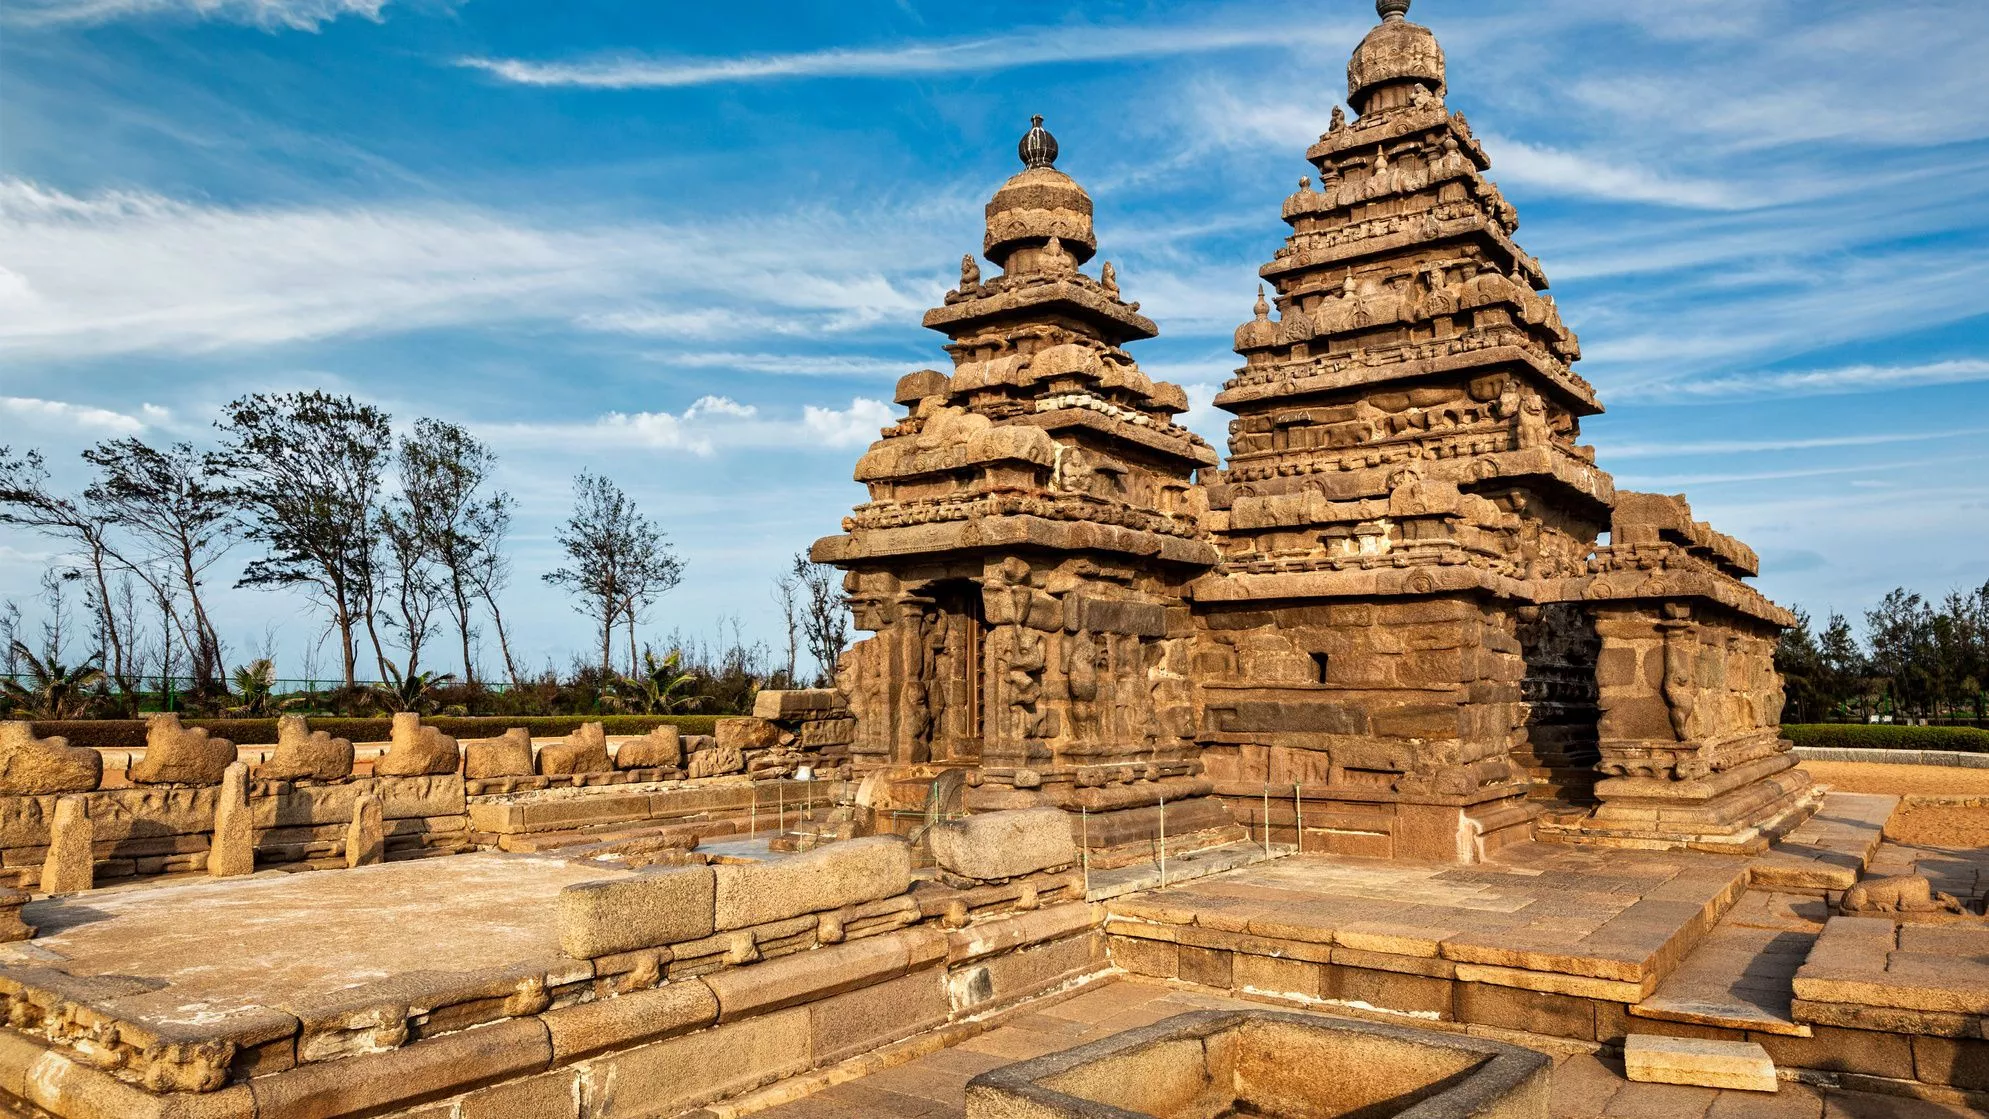 Shore Temple in India, Central Asia | Architecture - Rated 3.7